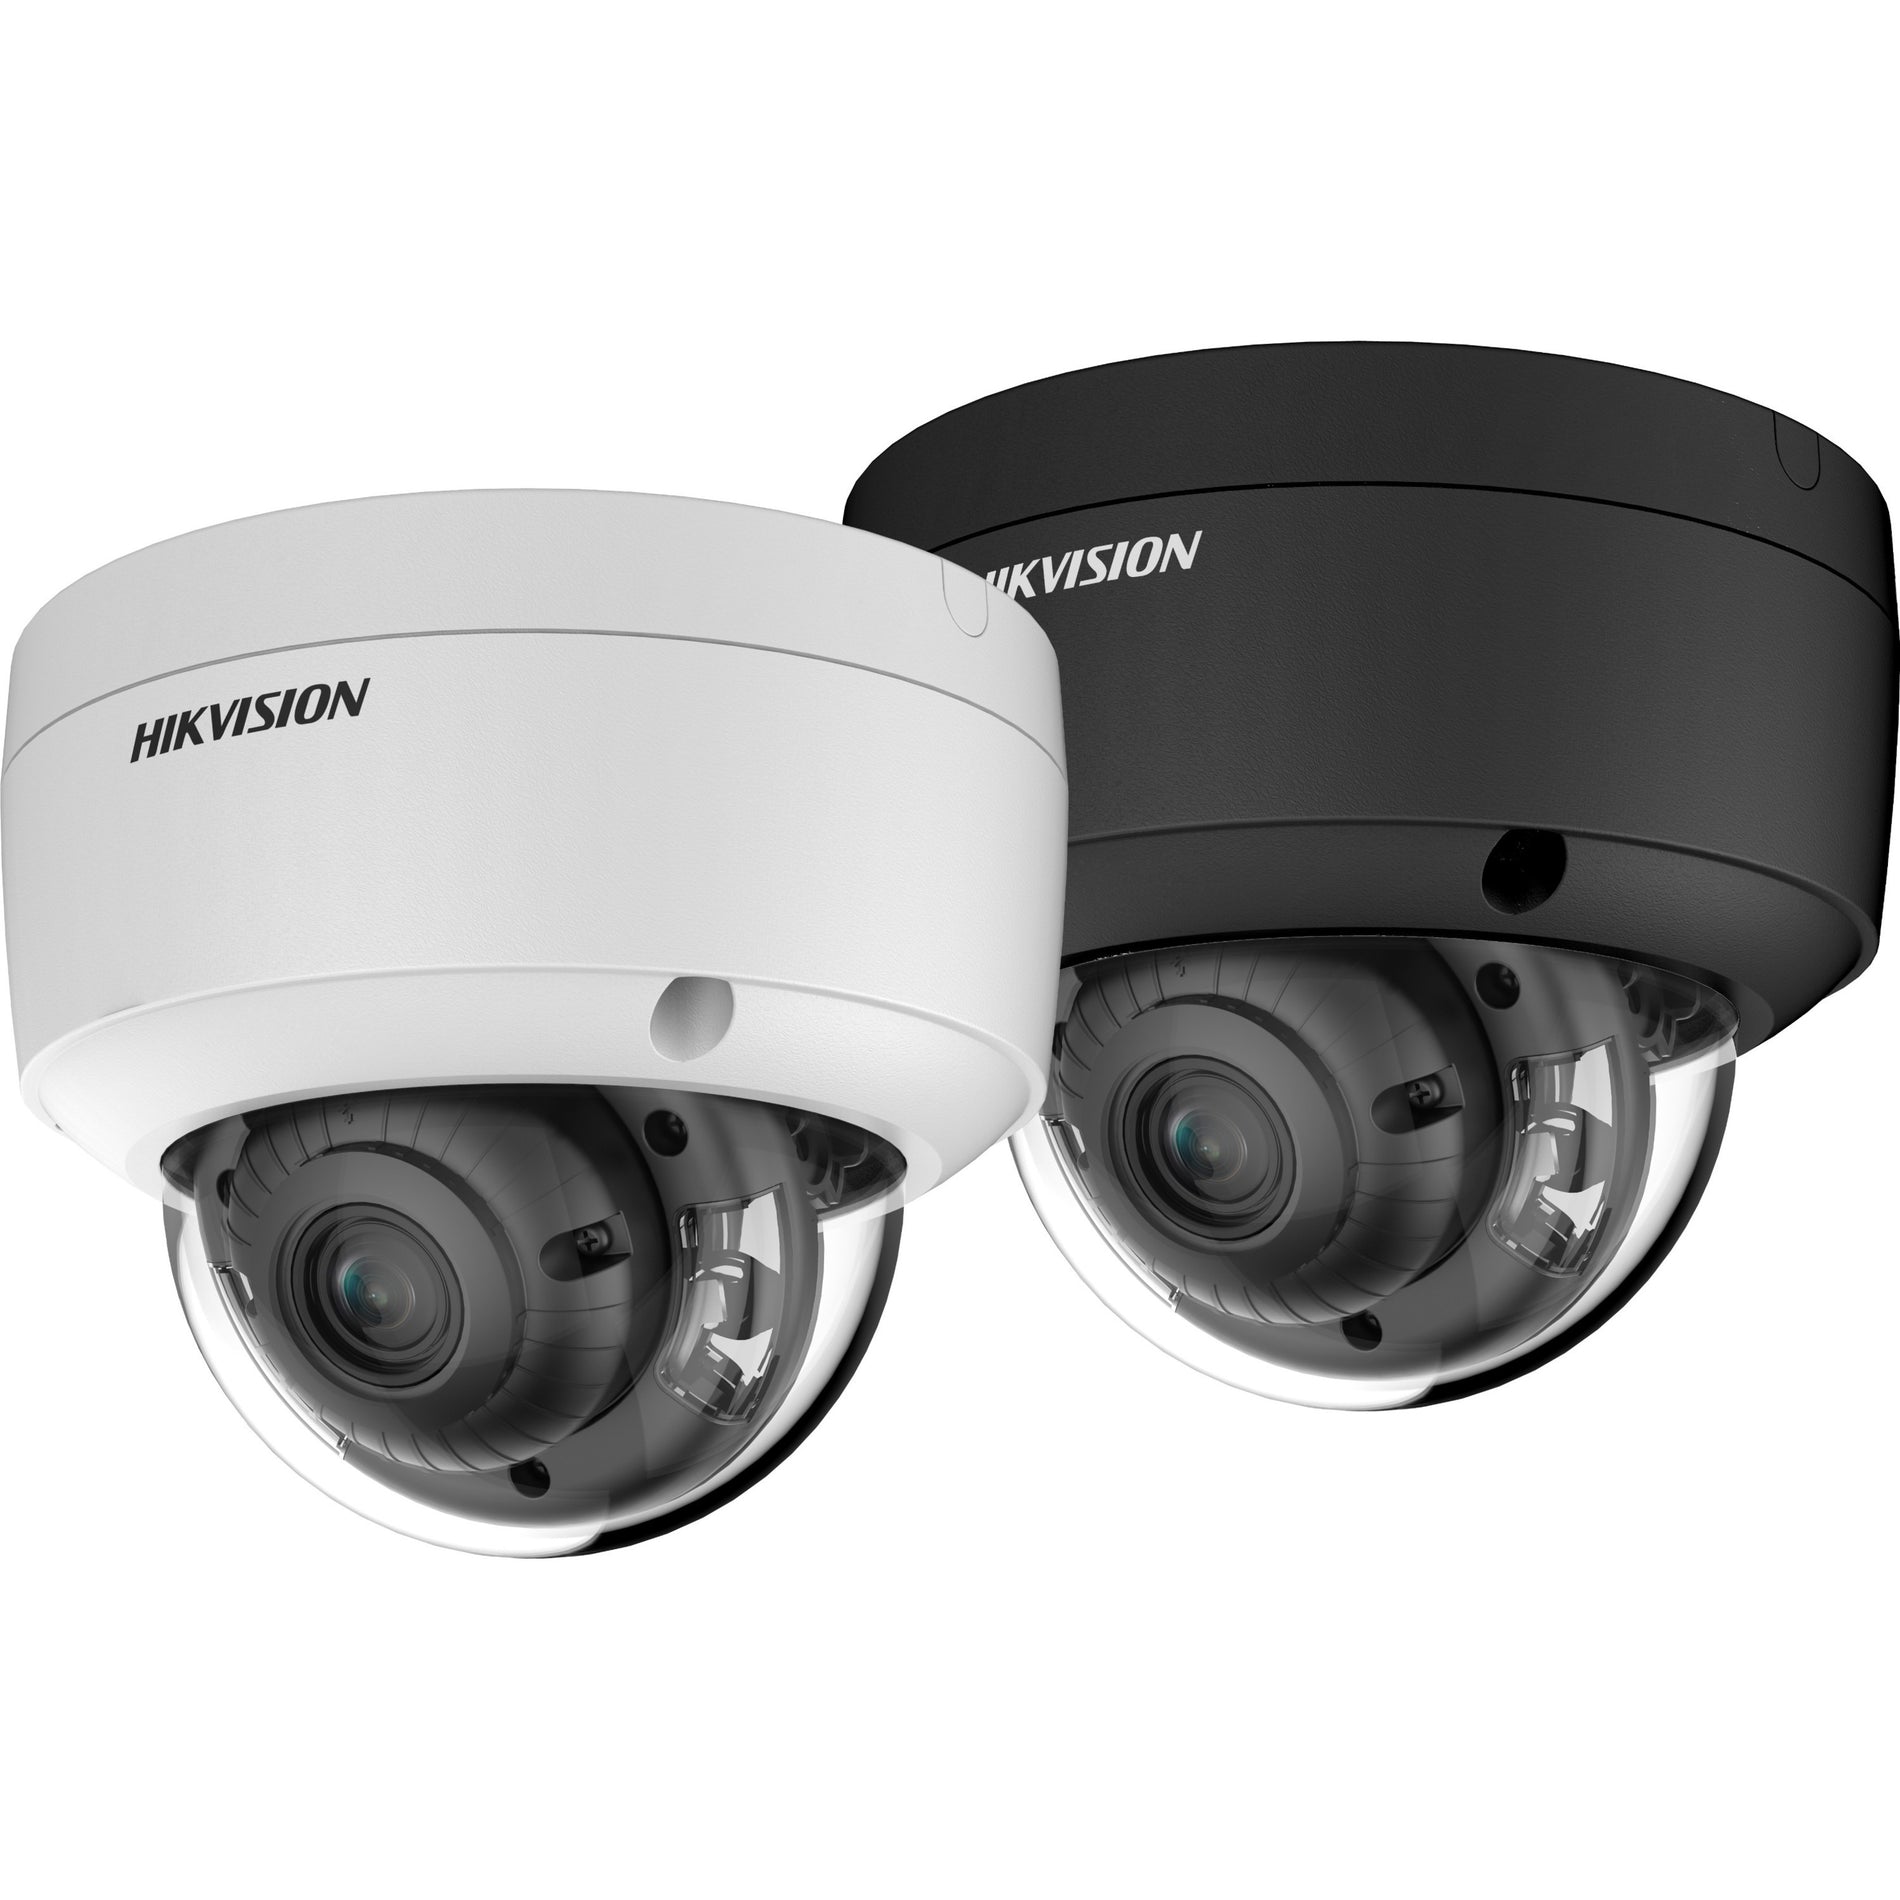 Hikvision DS-2CD2147G2-LSU 2.8MM ColorVu 4 MP Fixed Dome Network Camera, Color, Wide Dynamic Range, SD Card Local Storage